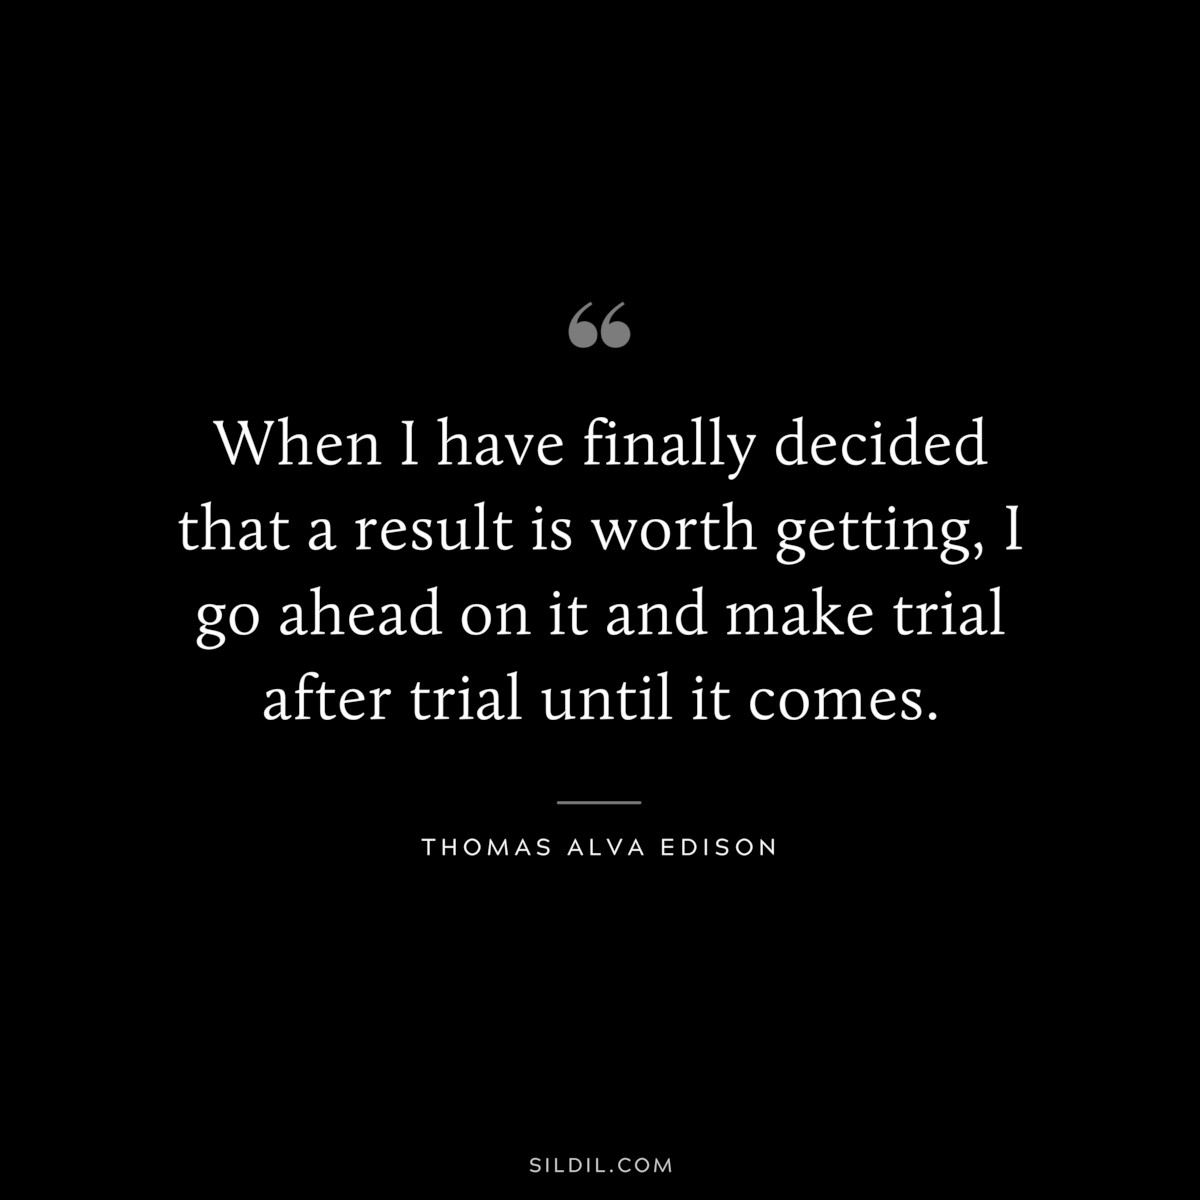 When I have finally decided that a result is worth getting, I go ahead on it and make trial after trial until it comes. ― Thomas Alva Edison